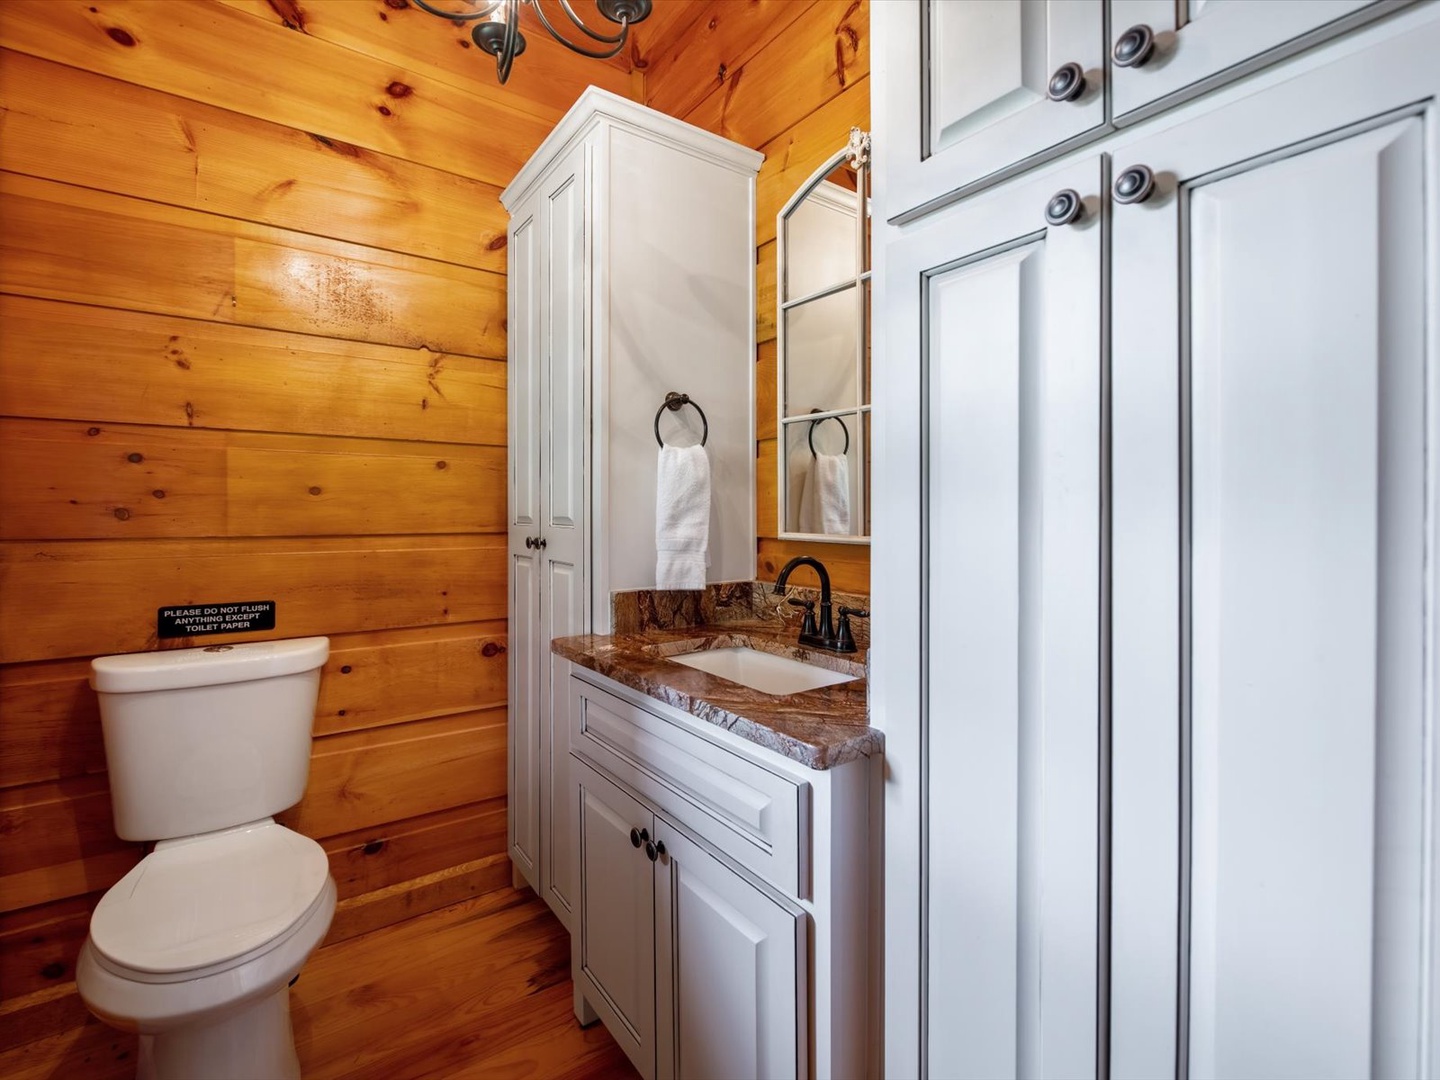 Take Me to the River - Entry Level Shared Bathroom